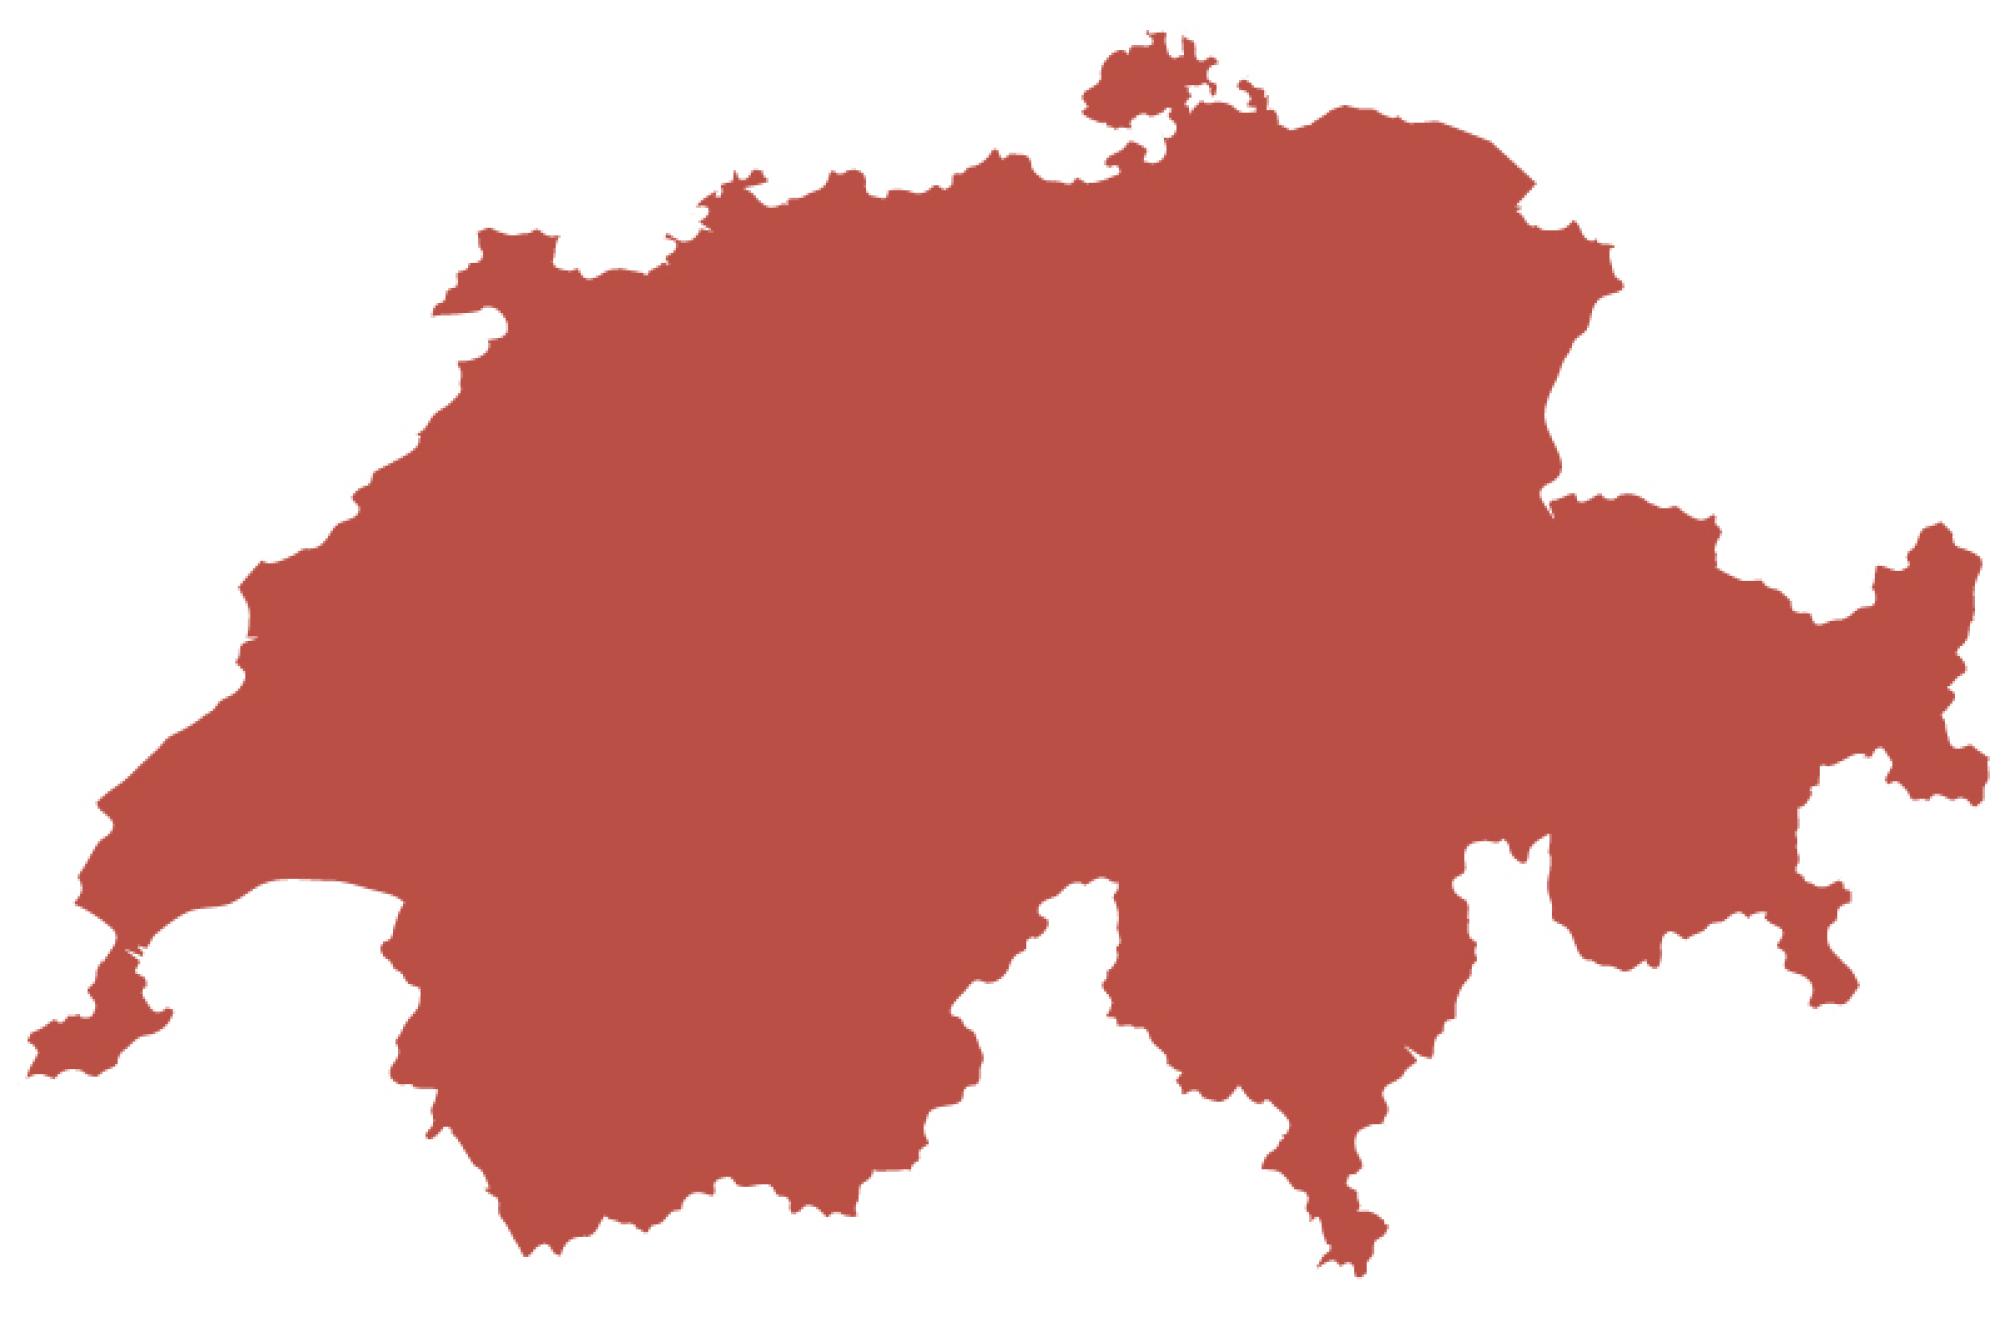 The first map shows only the outline of Switzerland.